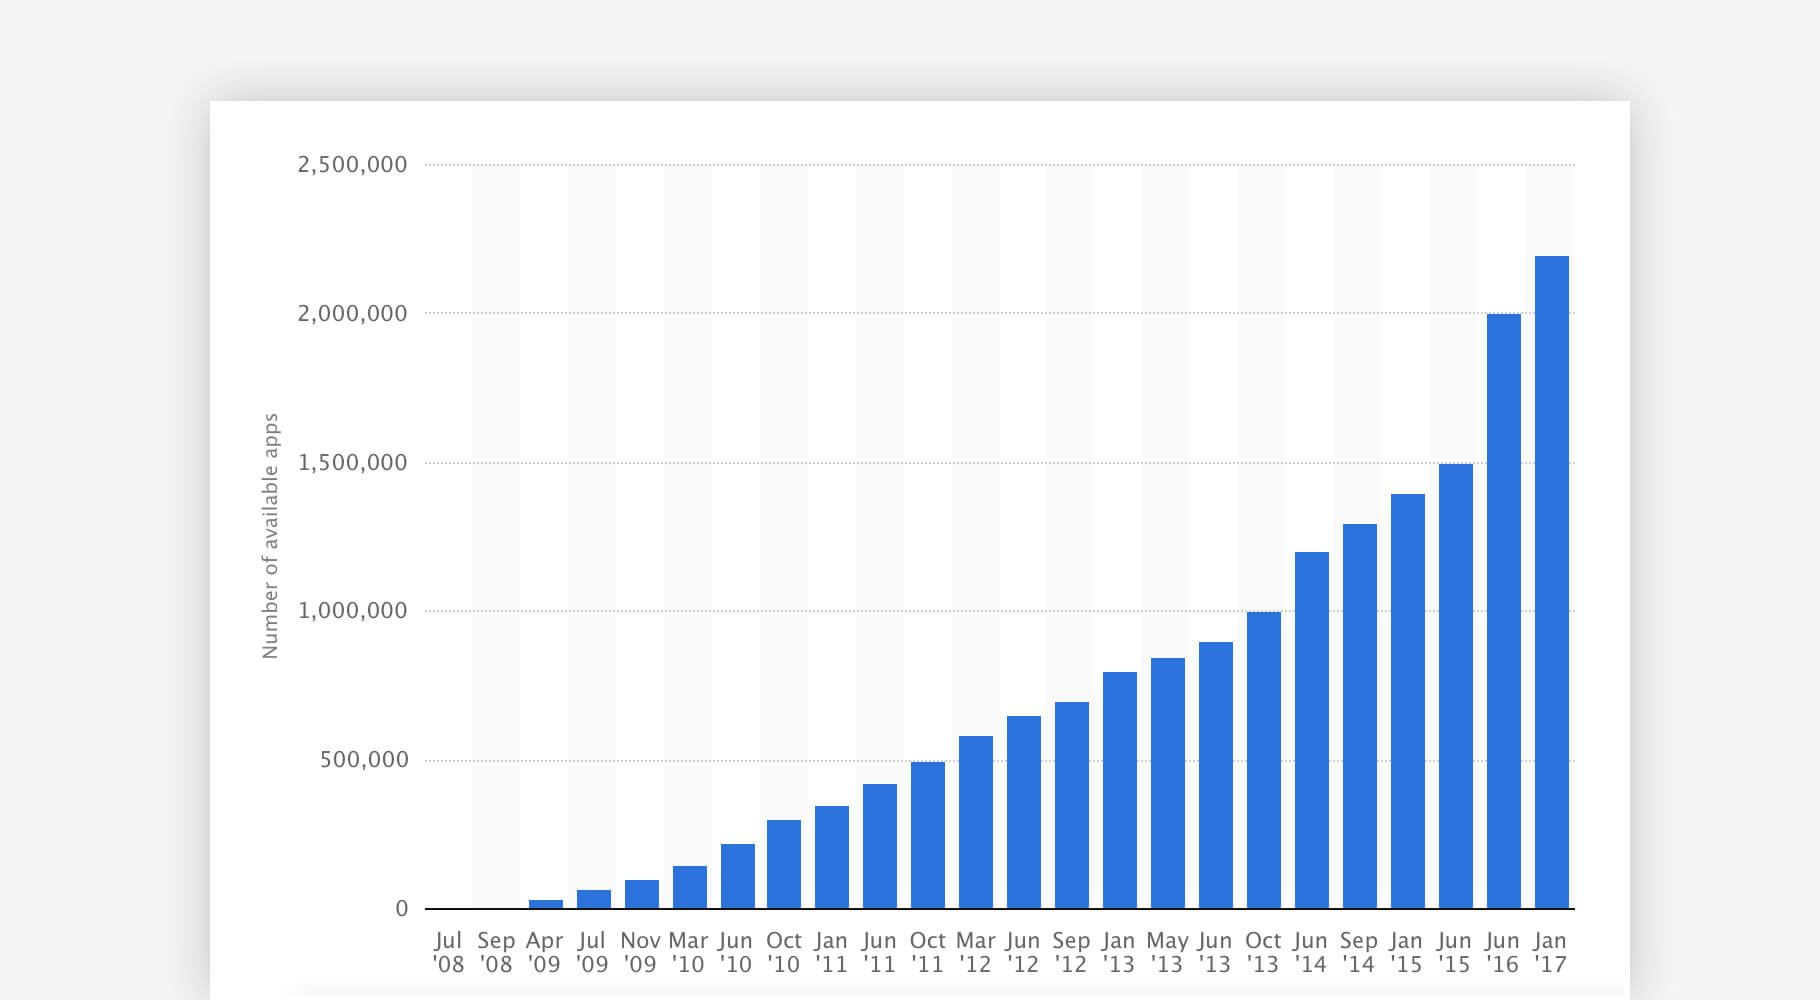 App Store analytics: number of available apps from July 2008 to January 2017